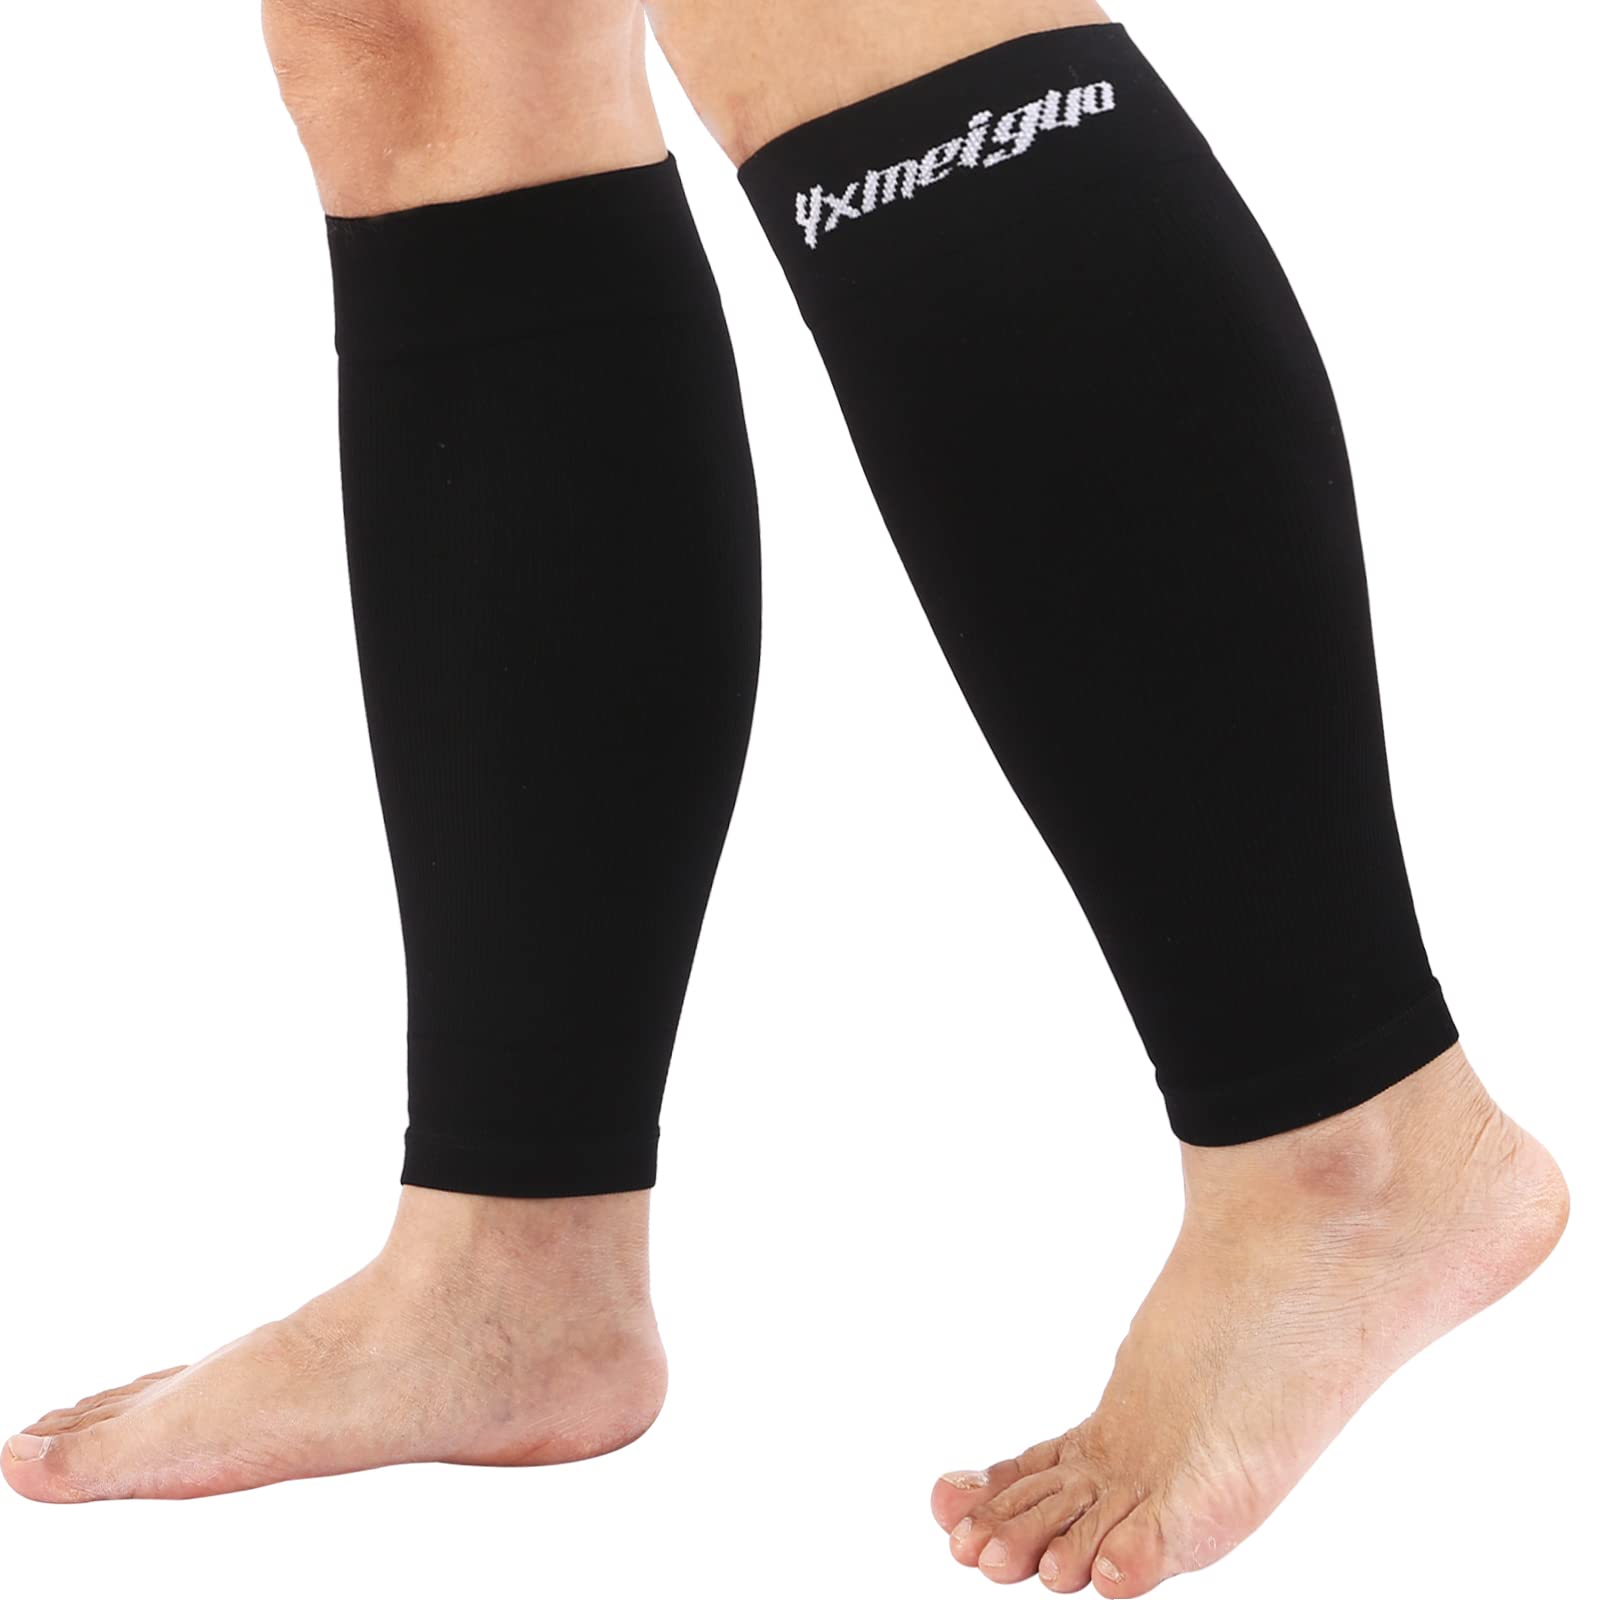 Plus Size Calf Compression Sleeve for Women Men, Extra Wide Leg Support for  Shin Splints, Leg Pain Relief and Support Circulation, Swelling, Travel,  Work, Sports and Daily Wear, Black M,ChYoung 